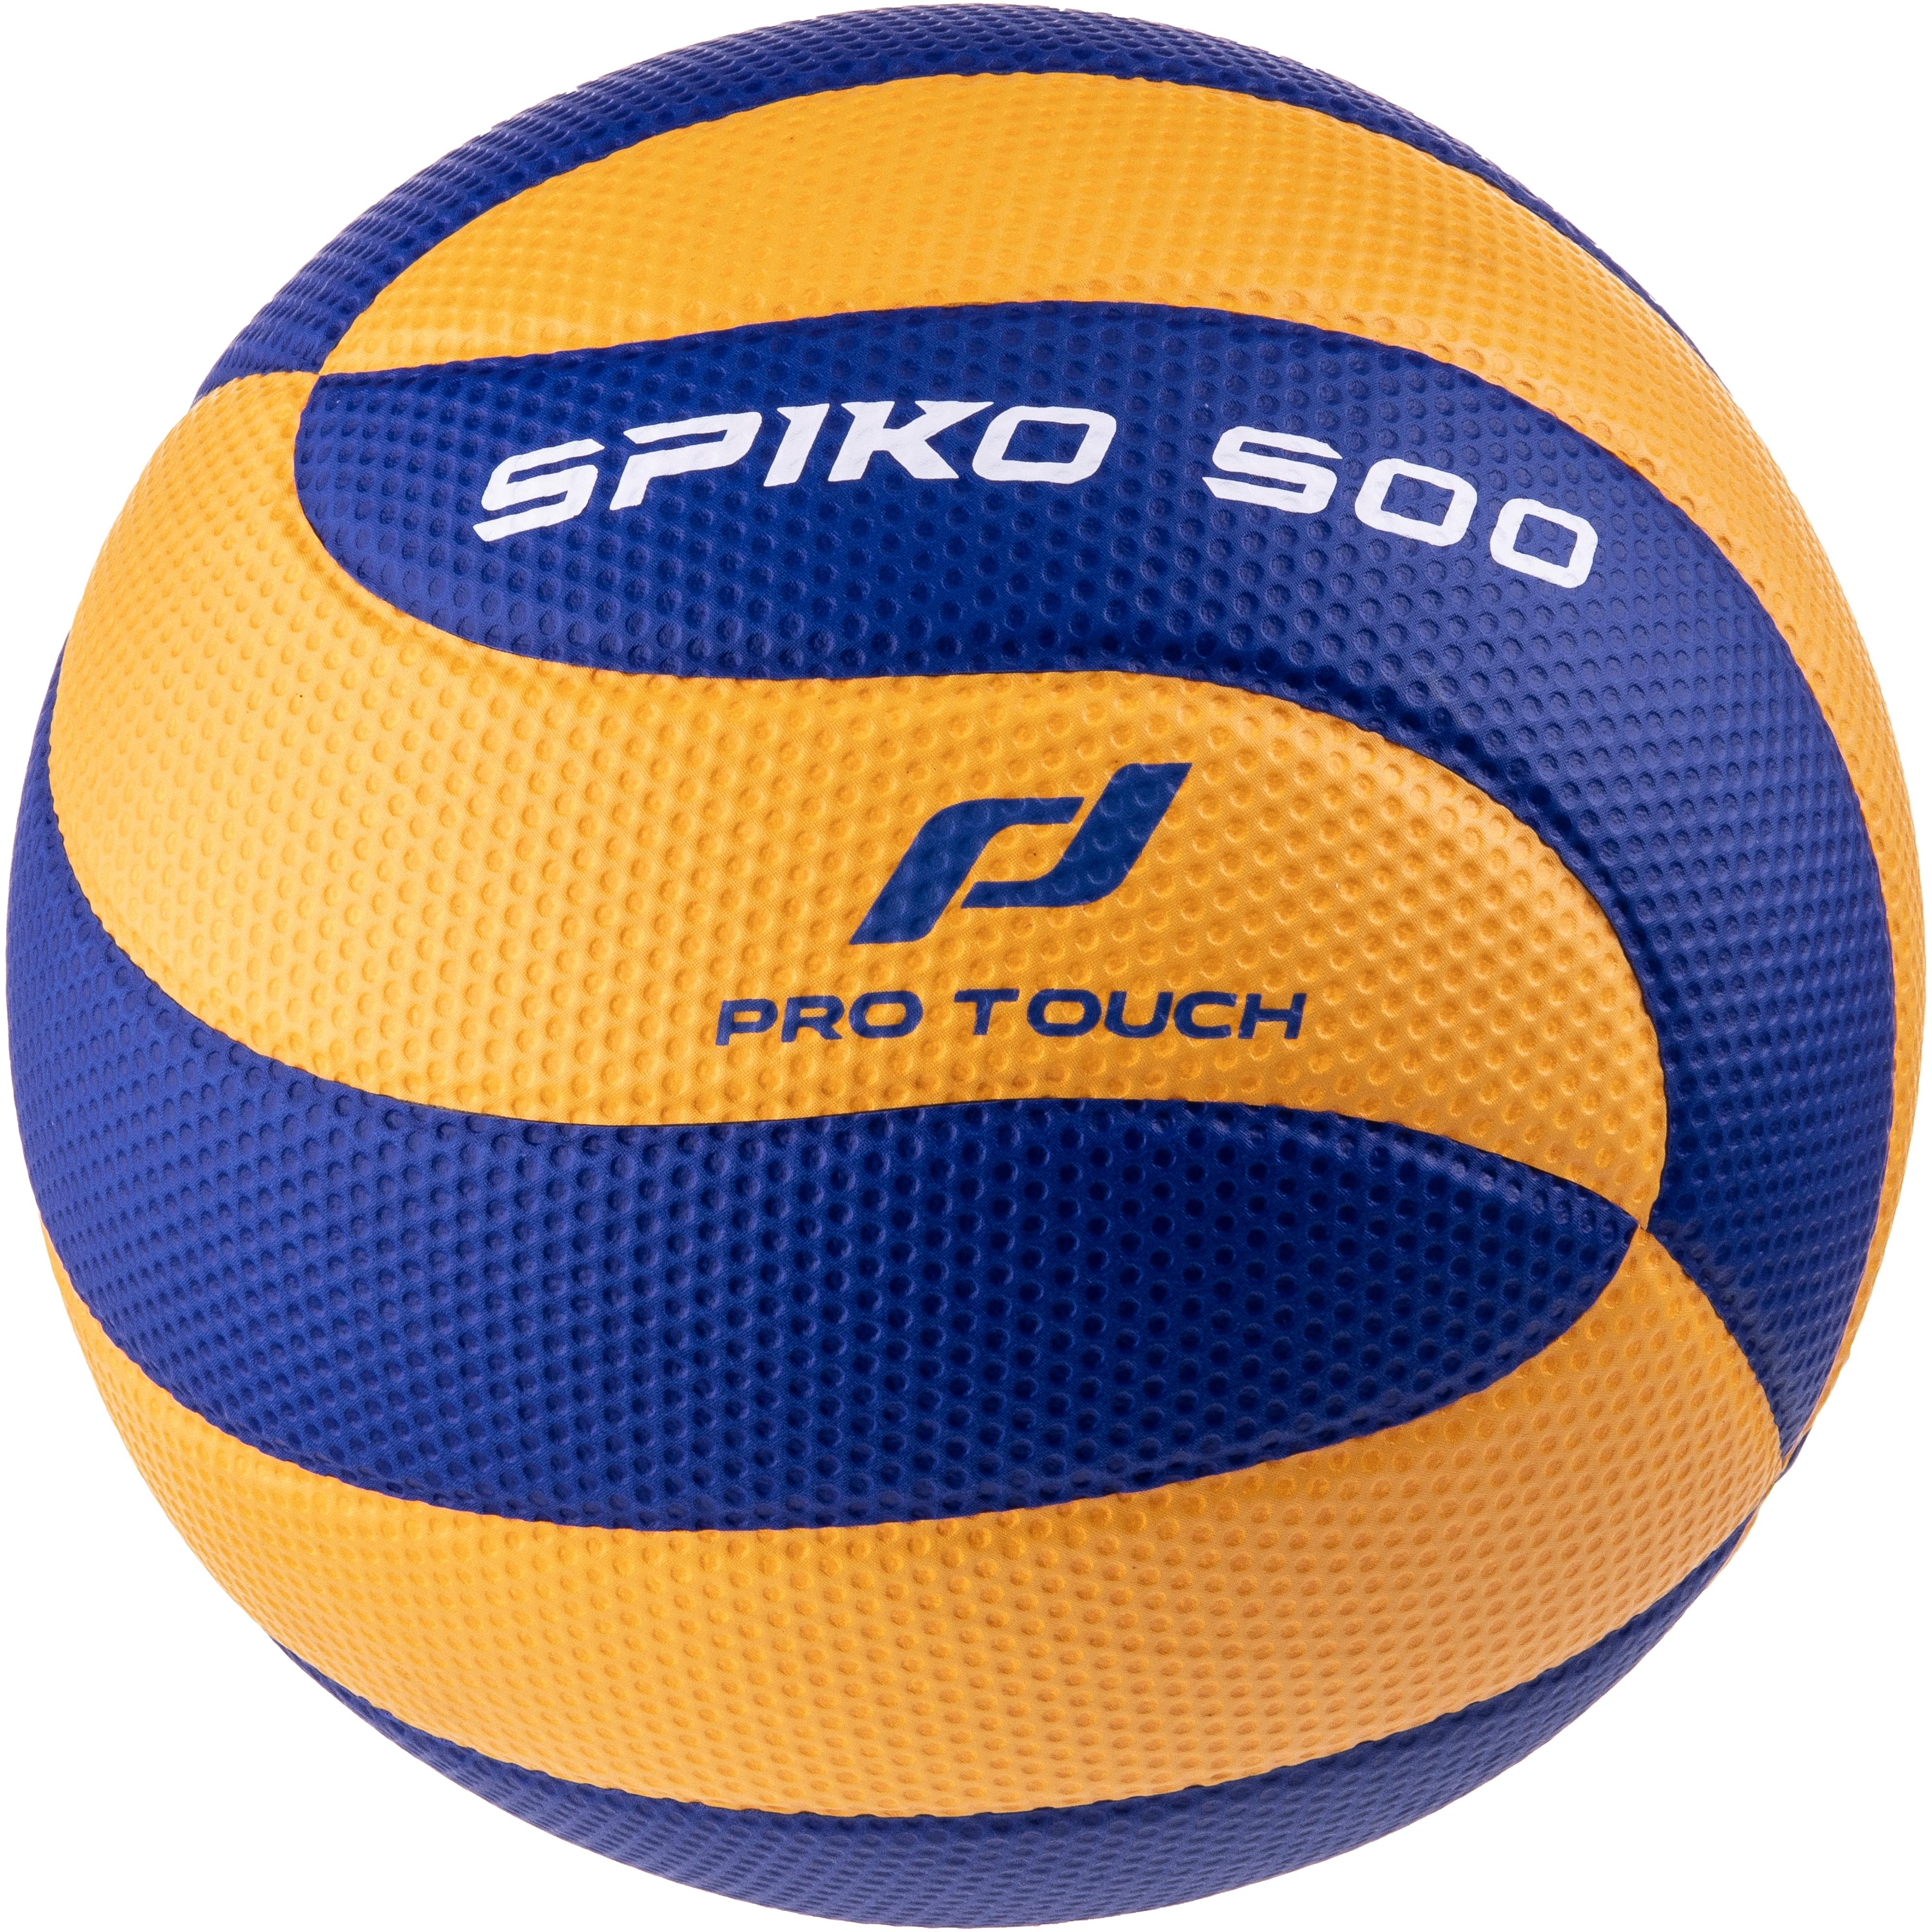 Image of Pro Touch Spiko 500 Volleyball